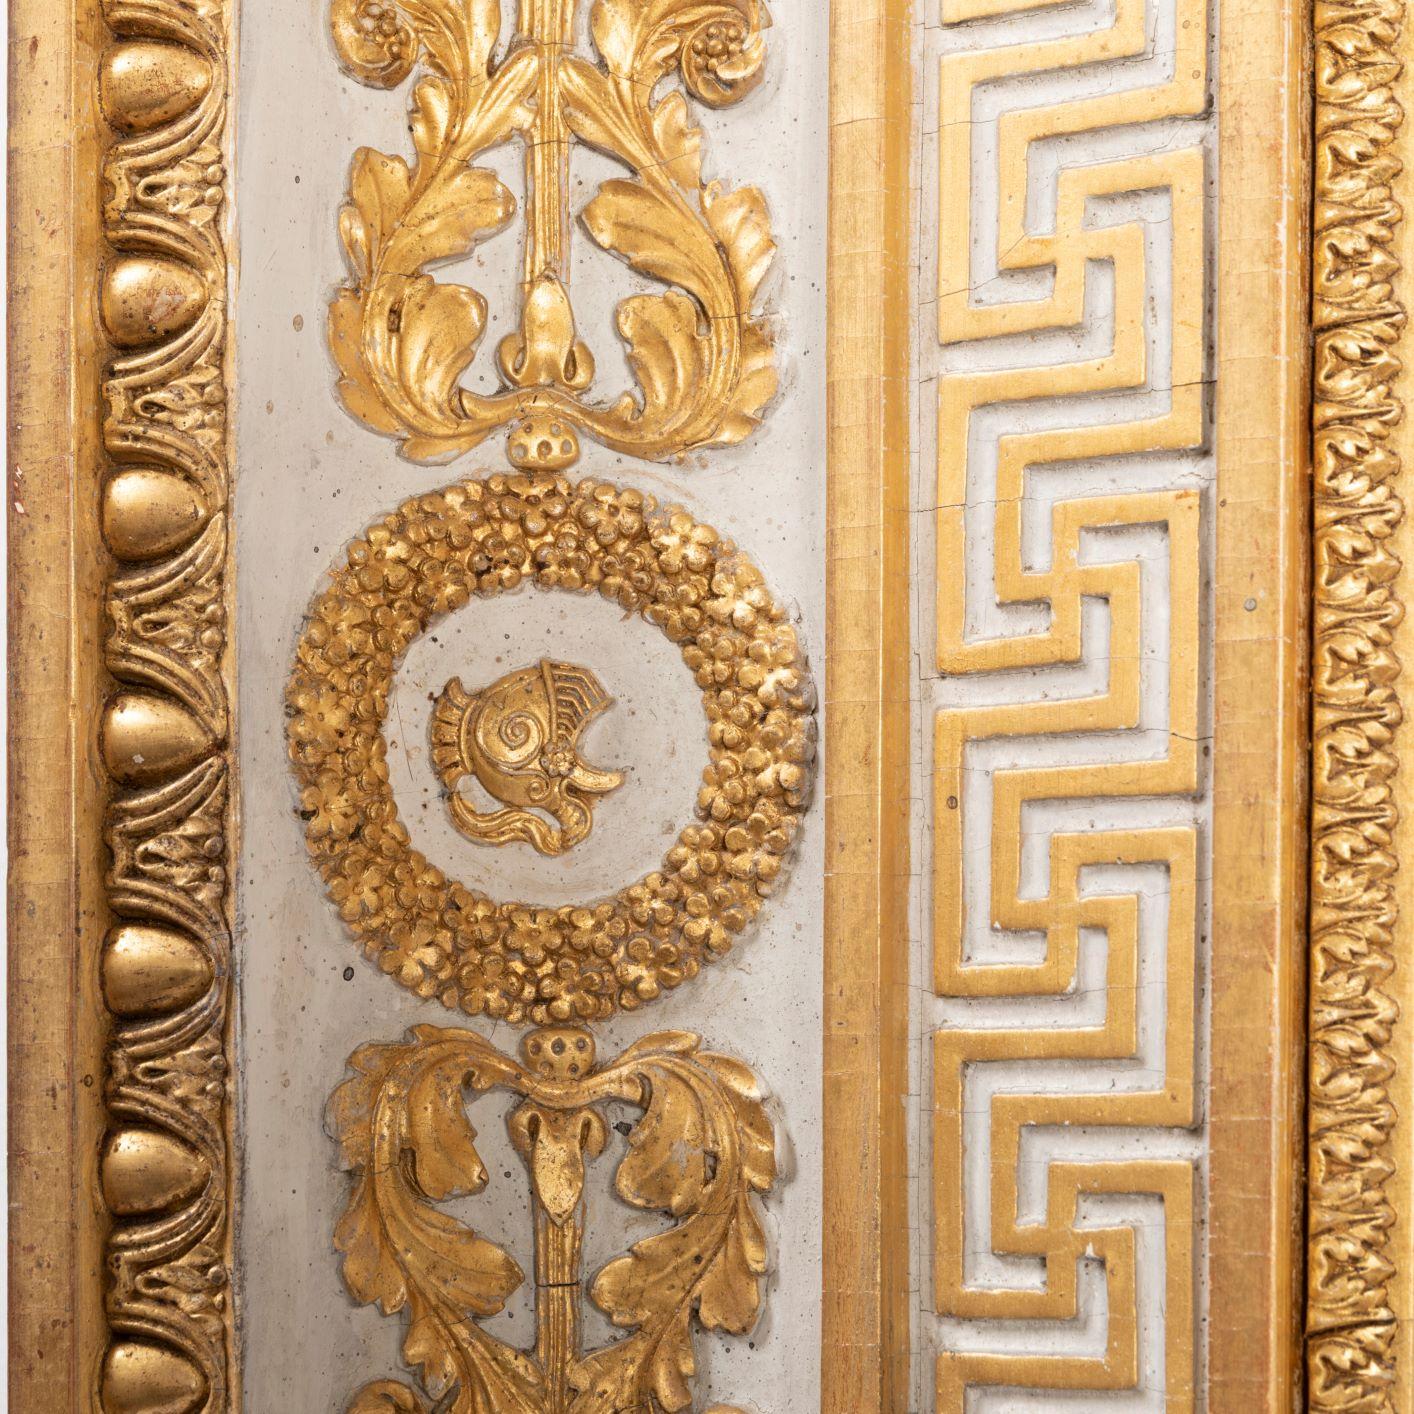 Splendid French Empire Carved Giltwood Frame or Mirror France Early 19th Century For Sale 4